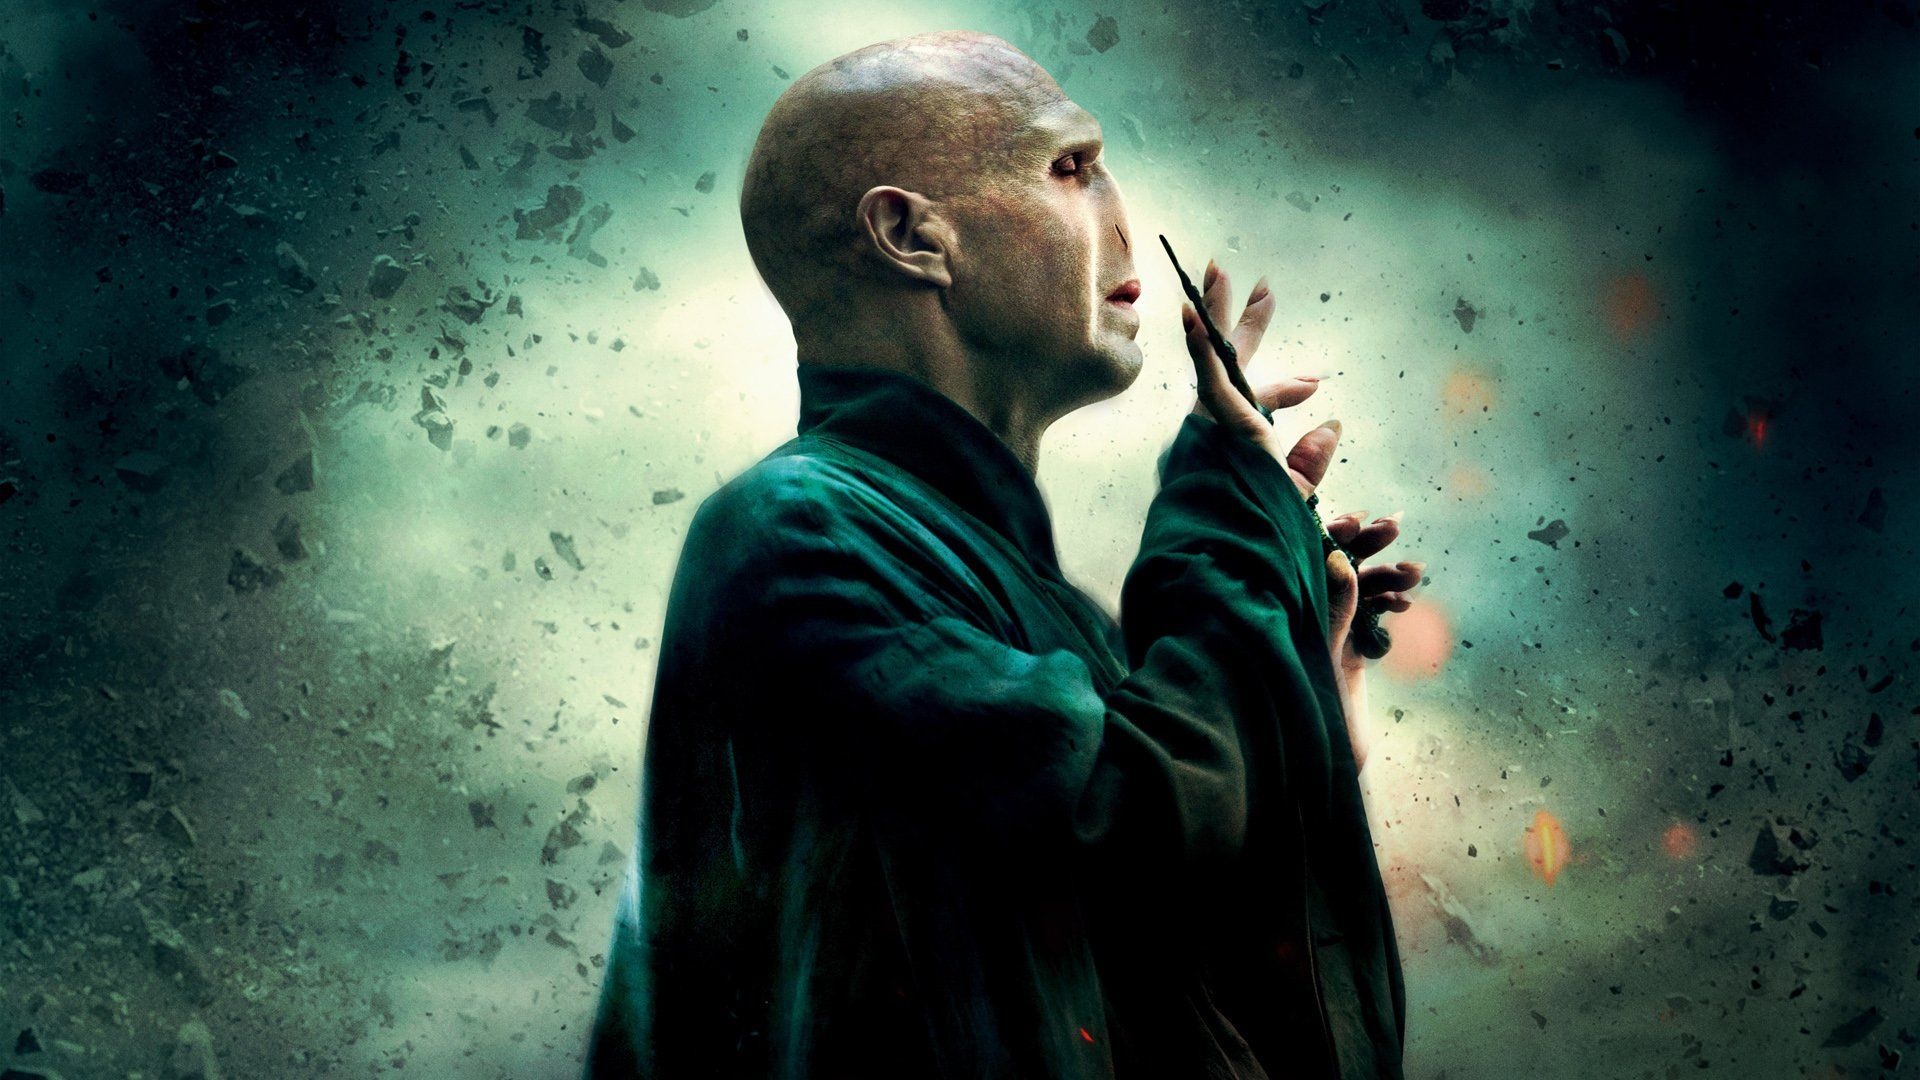 Deathly Hallows, Lord Voldemort, Movie Poster, The Dark Lord, 1920x1080 Full HD Desktop